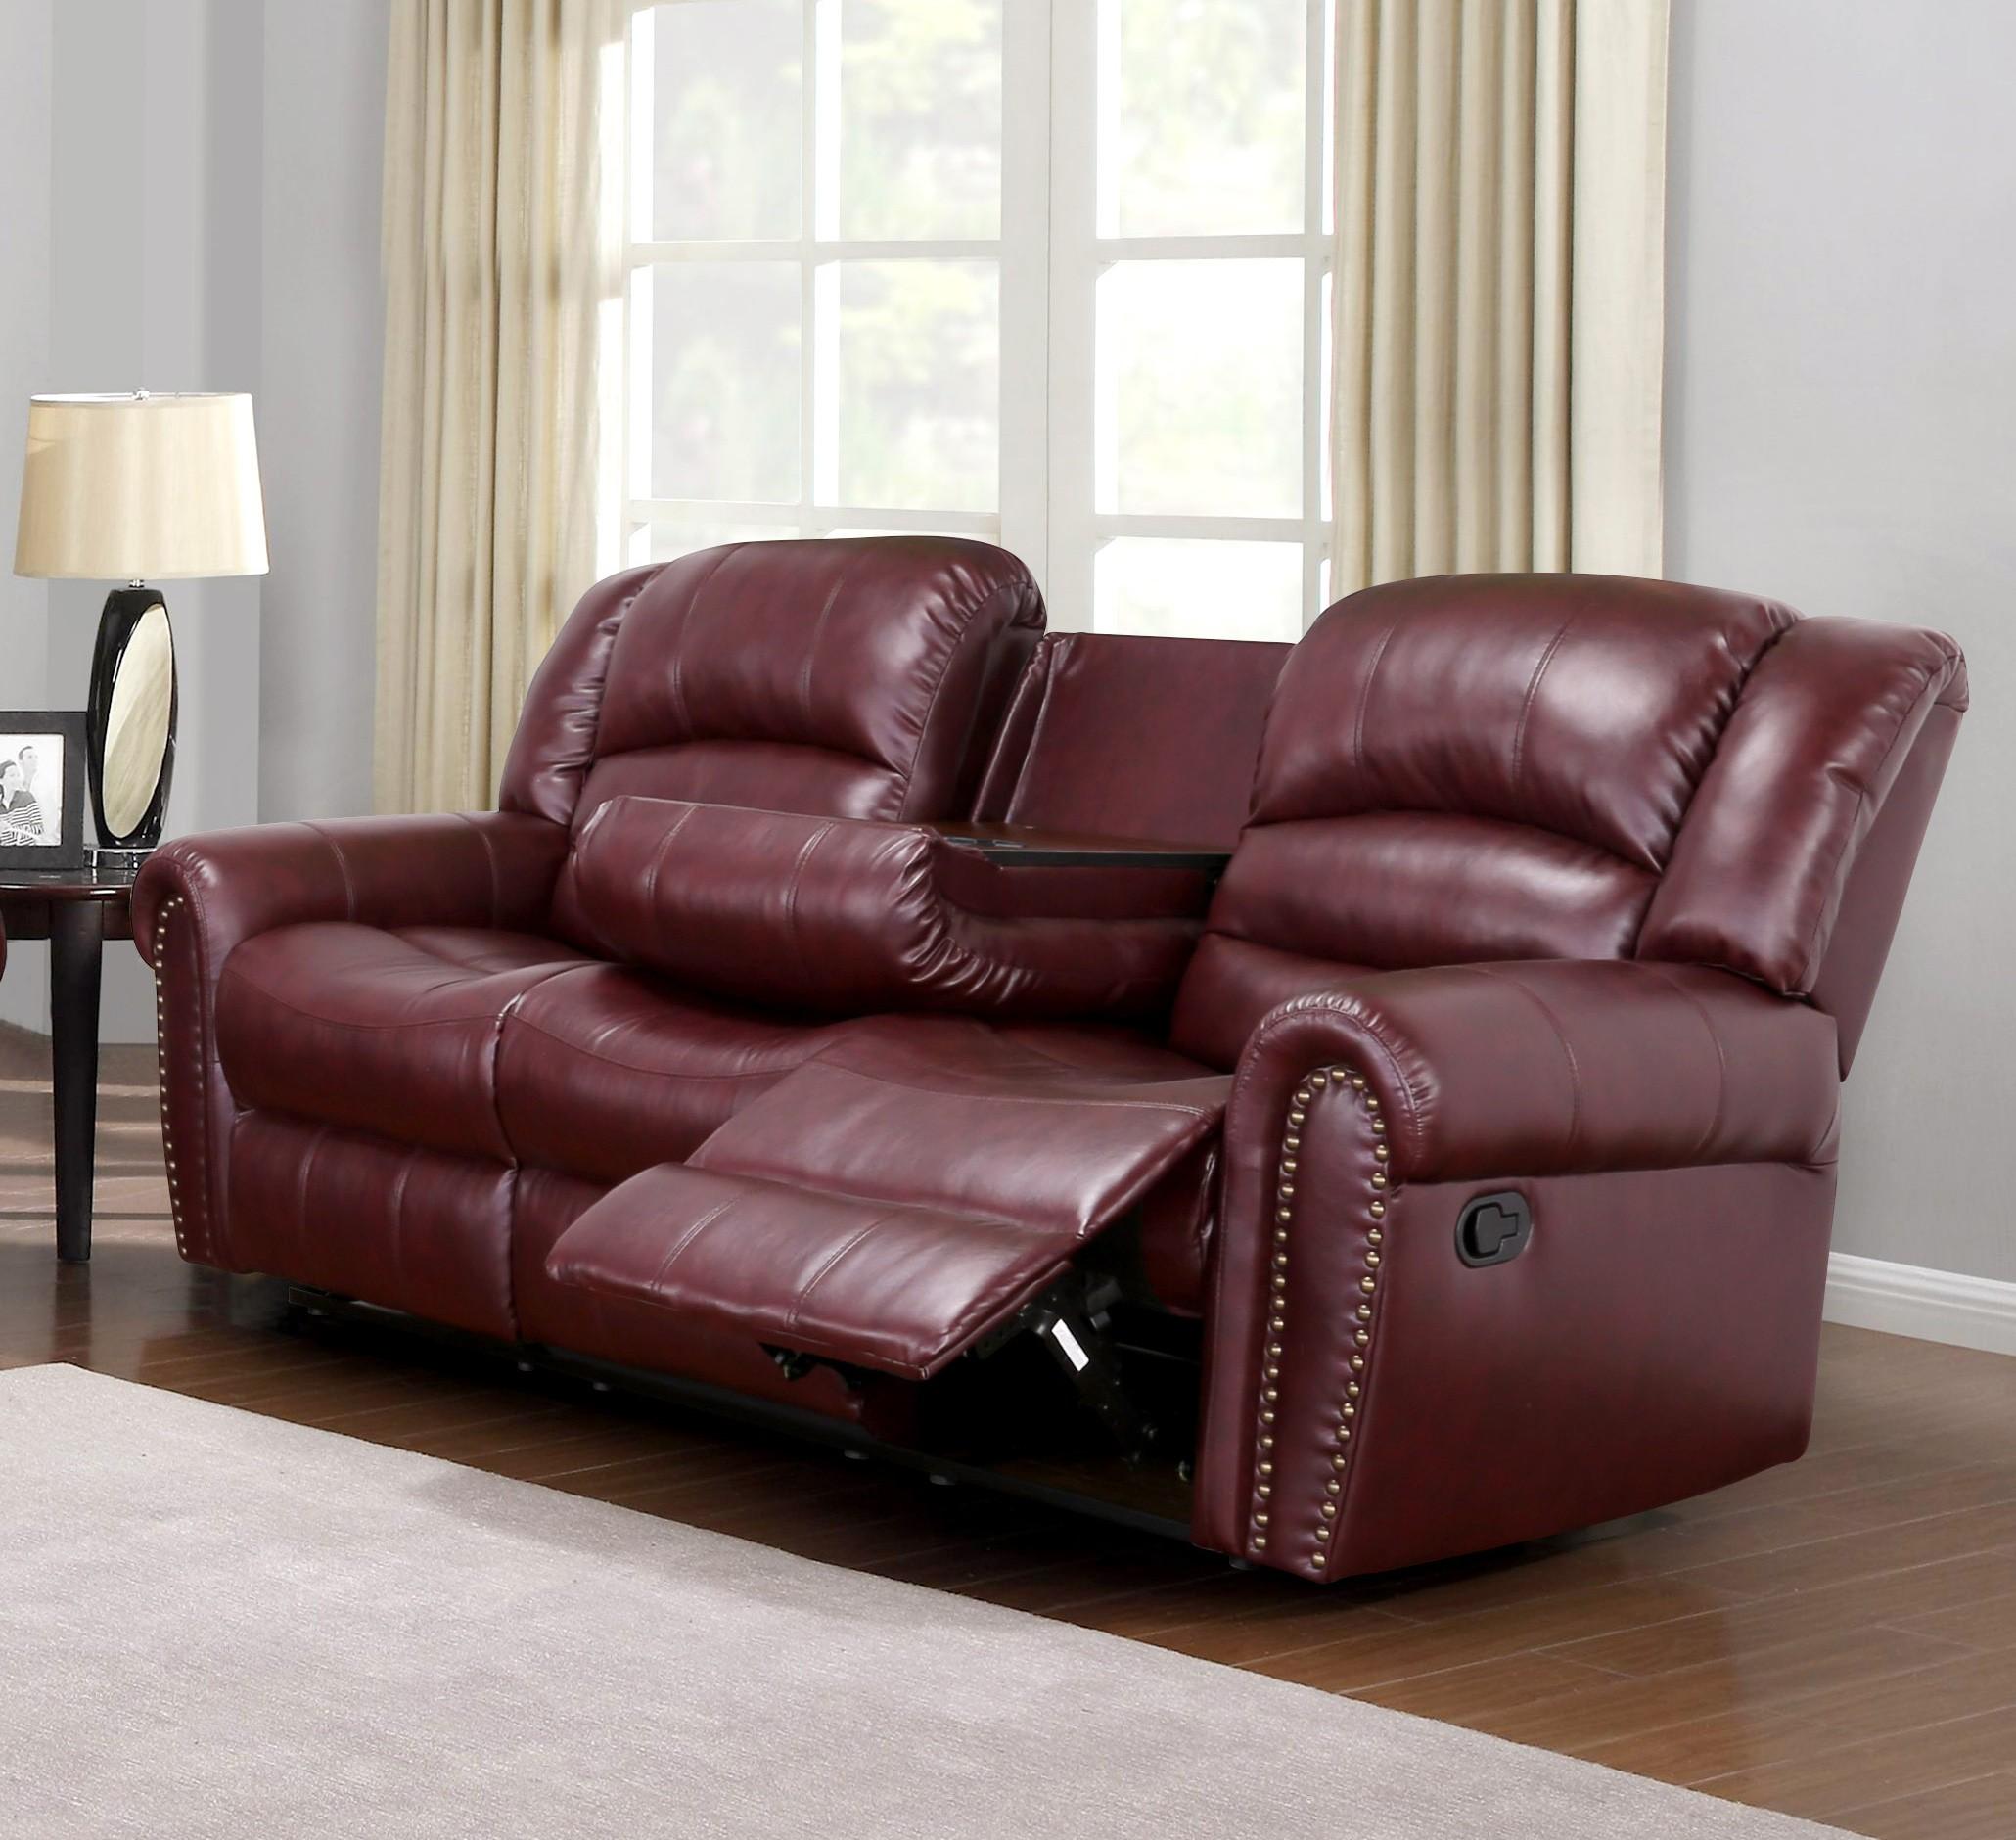 

    
Meridian 686 Chelsea Living Room Sofa in Burgundy Bonded Leather Contemporary
